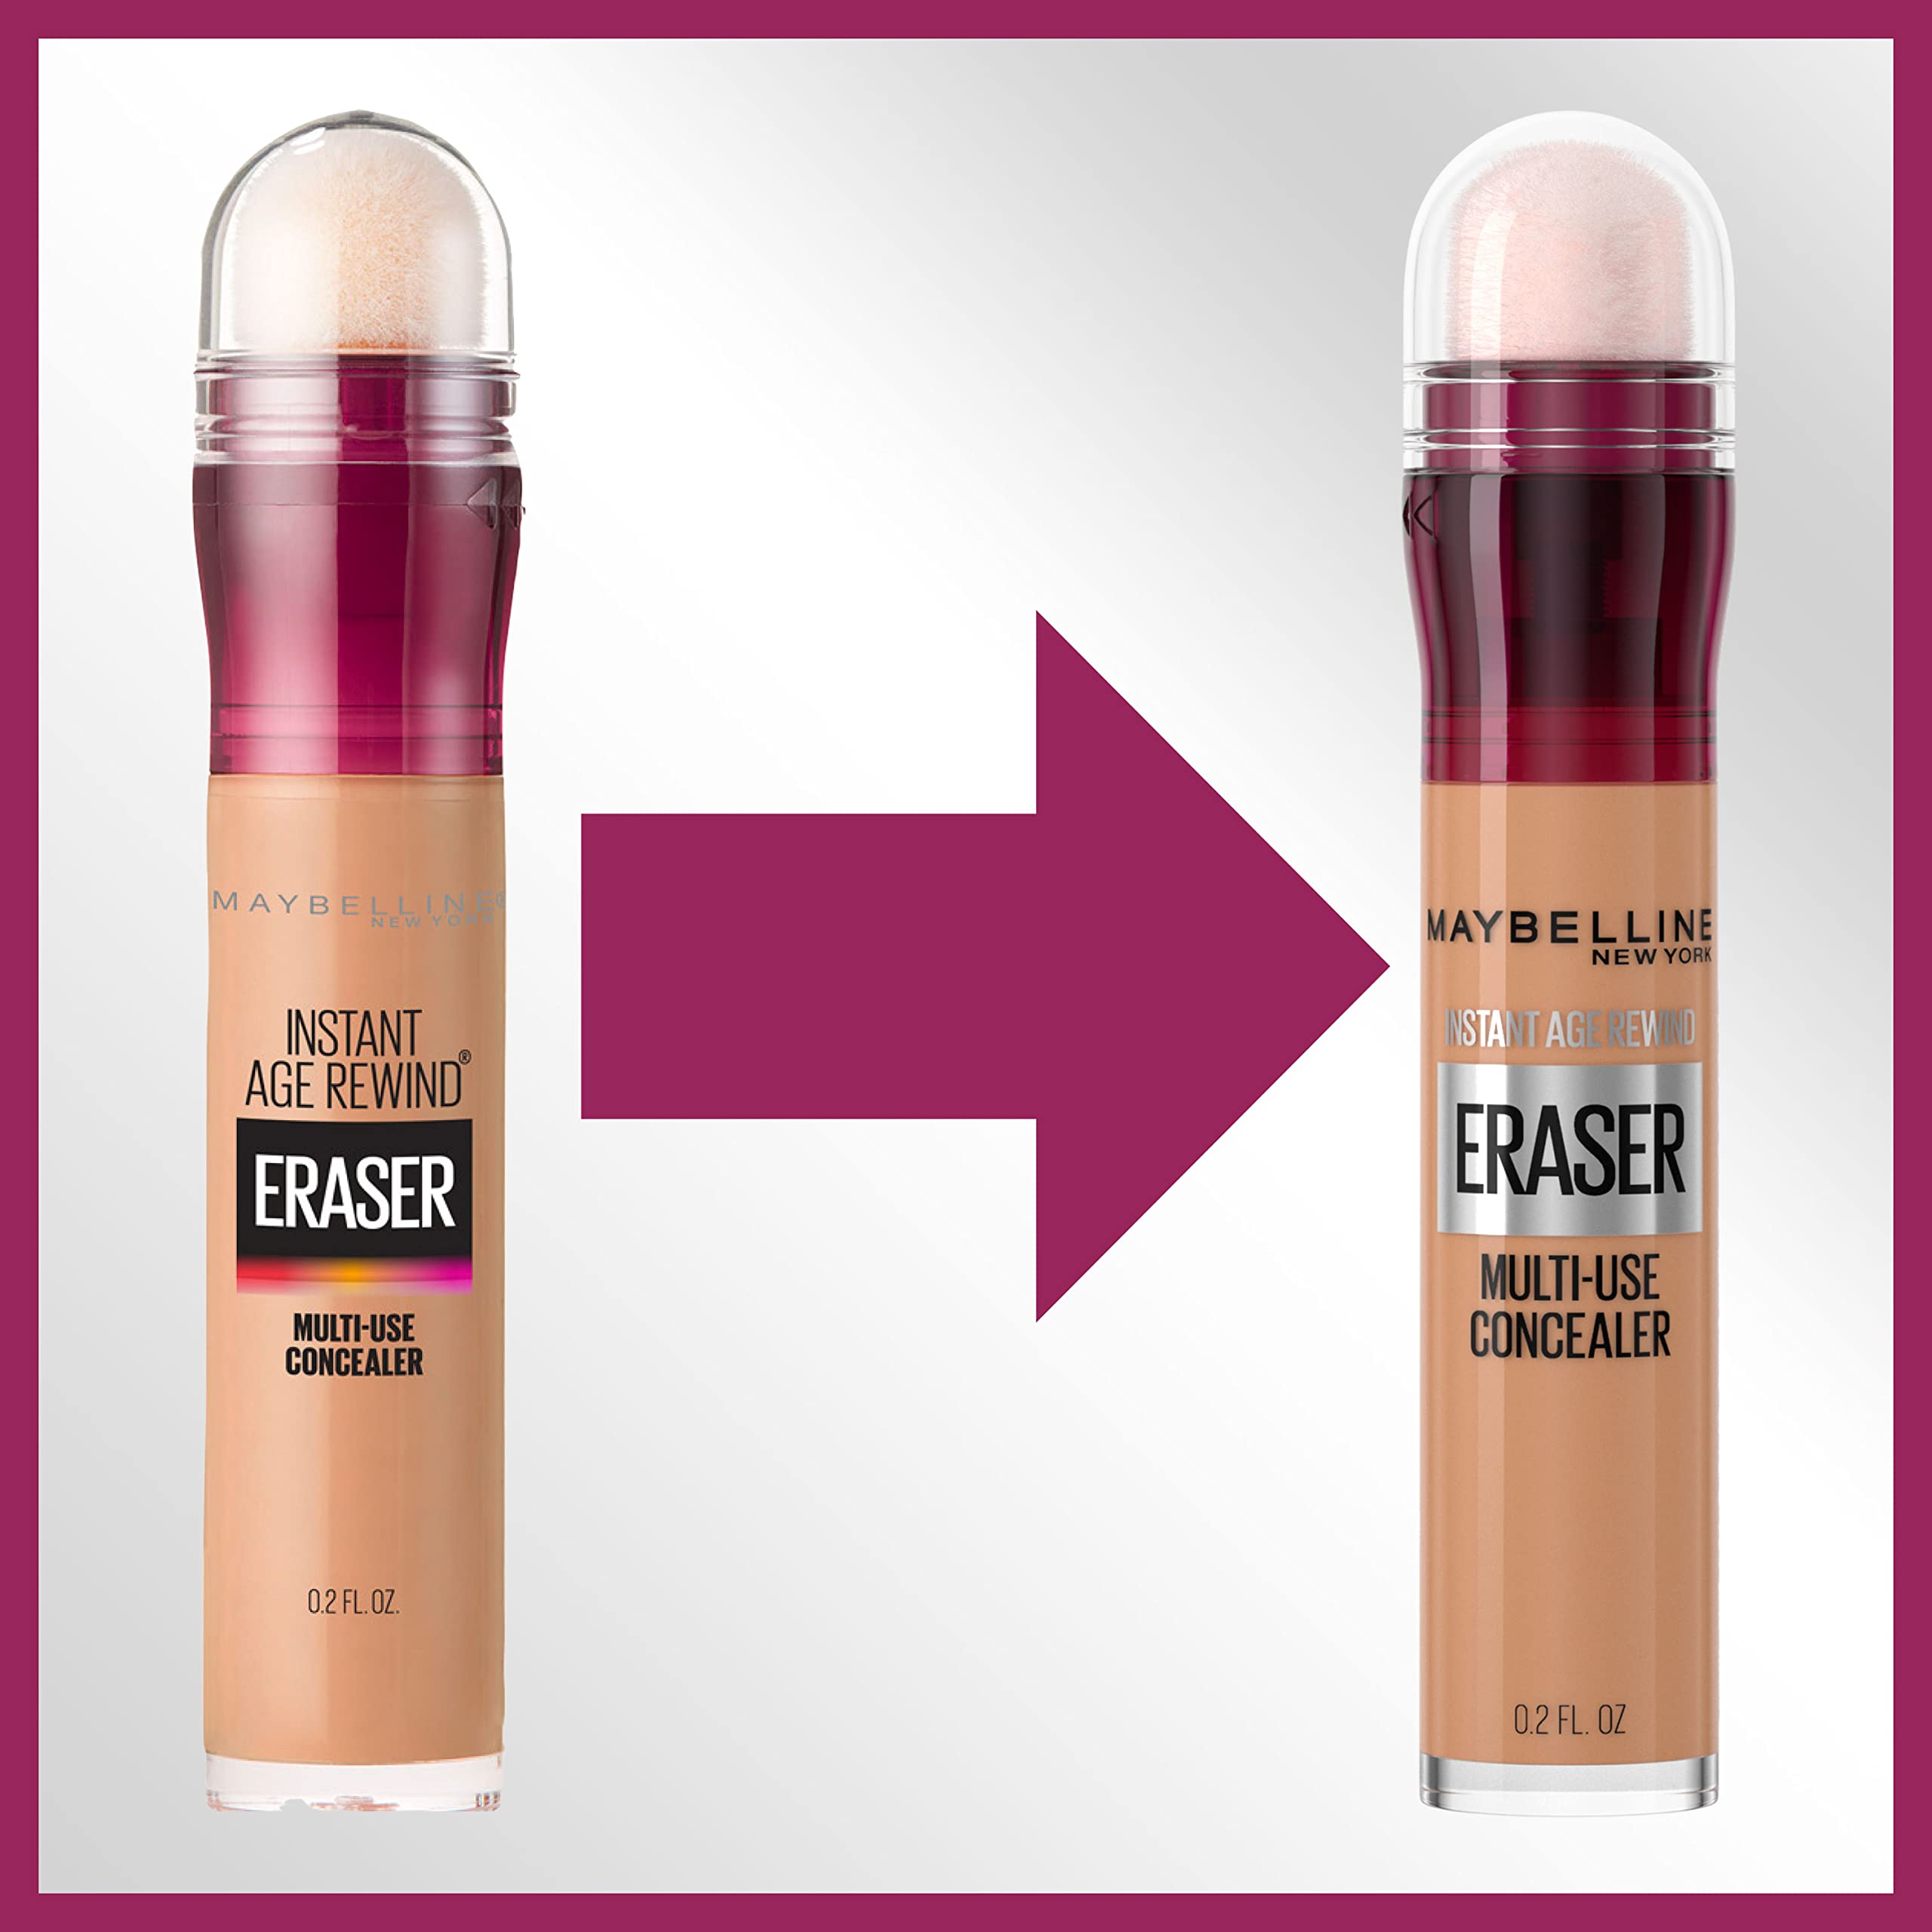 Maybelline Instant Age Rewind Eraser Dark Circles Treatment Multi-Use Concealer, 141, 1 Count (Packaging May Vary)